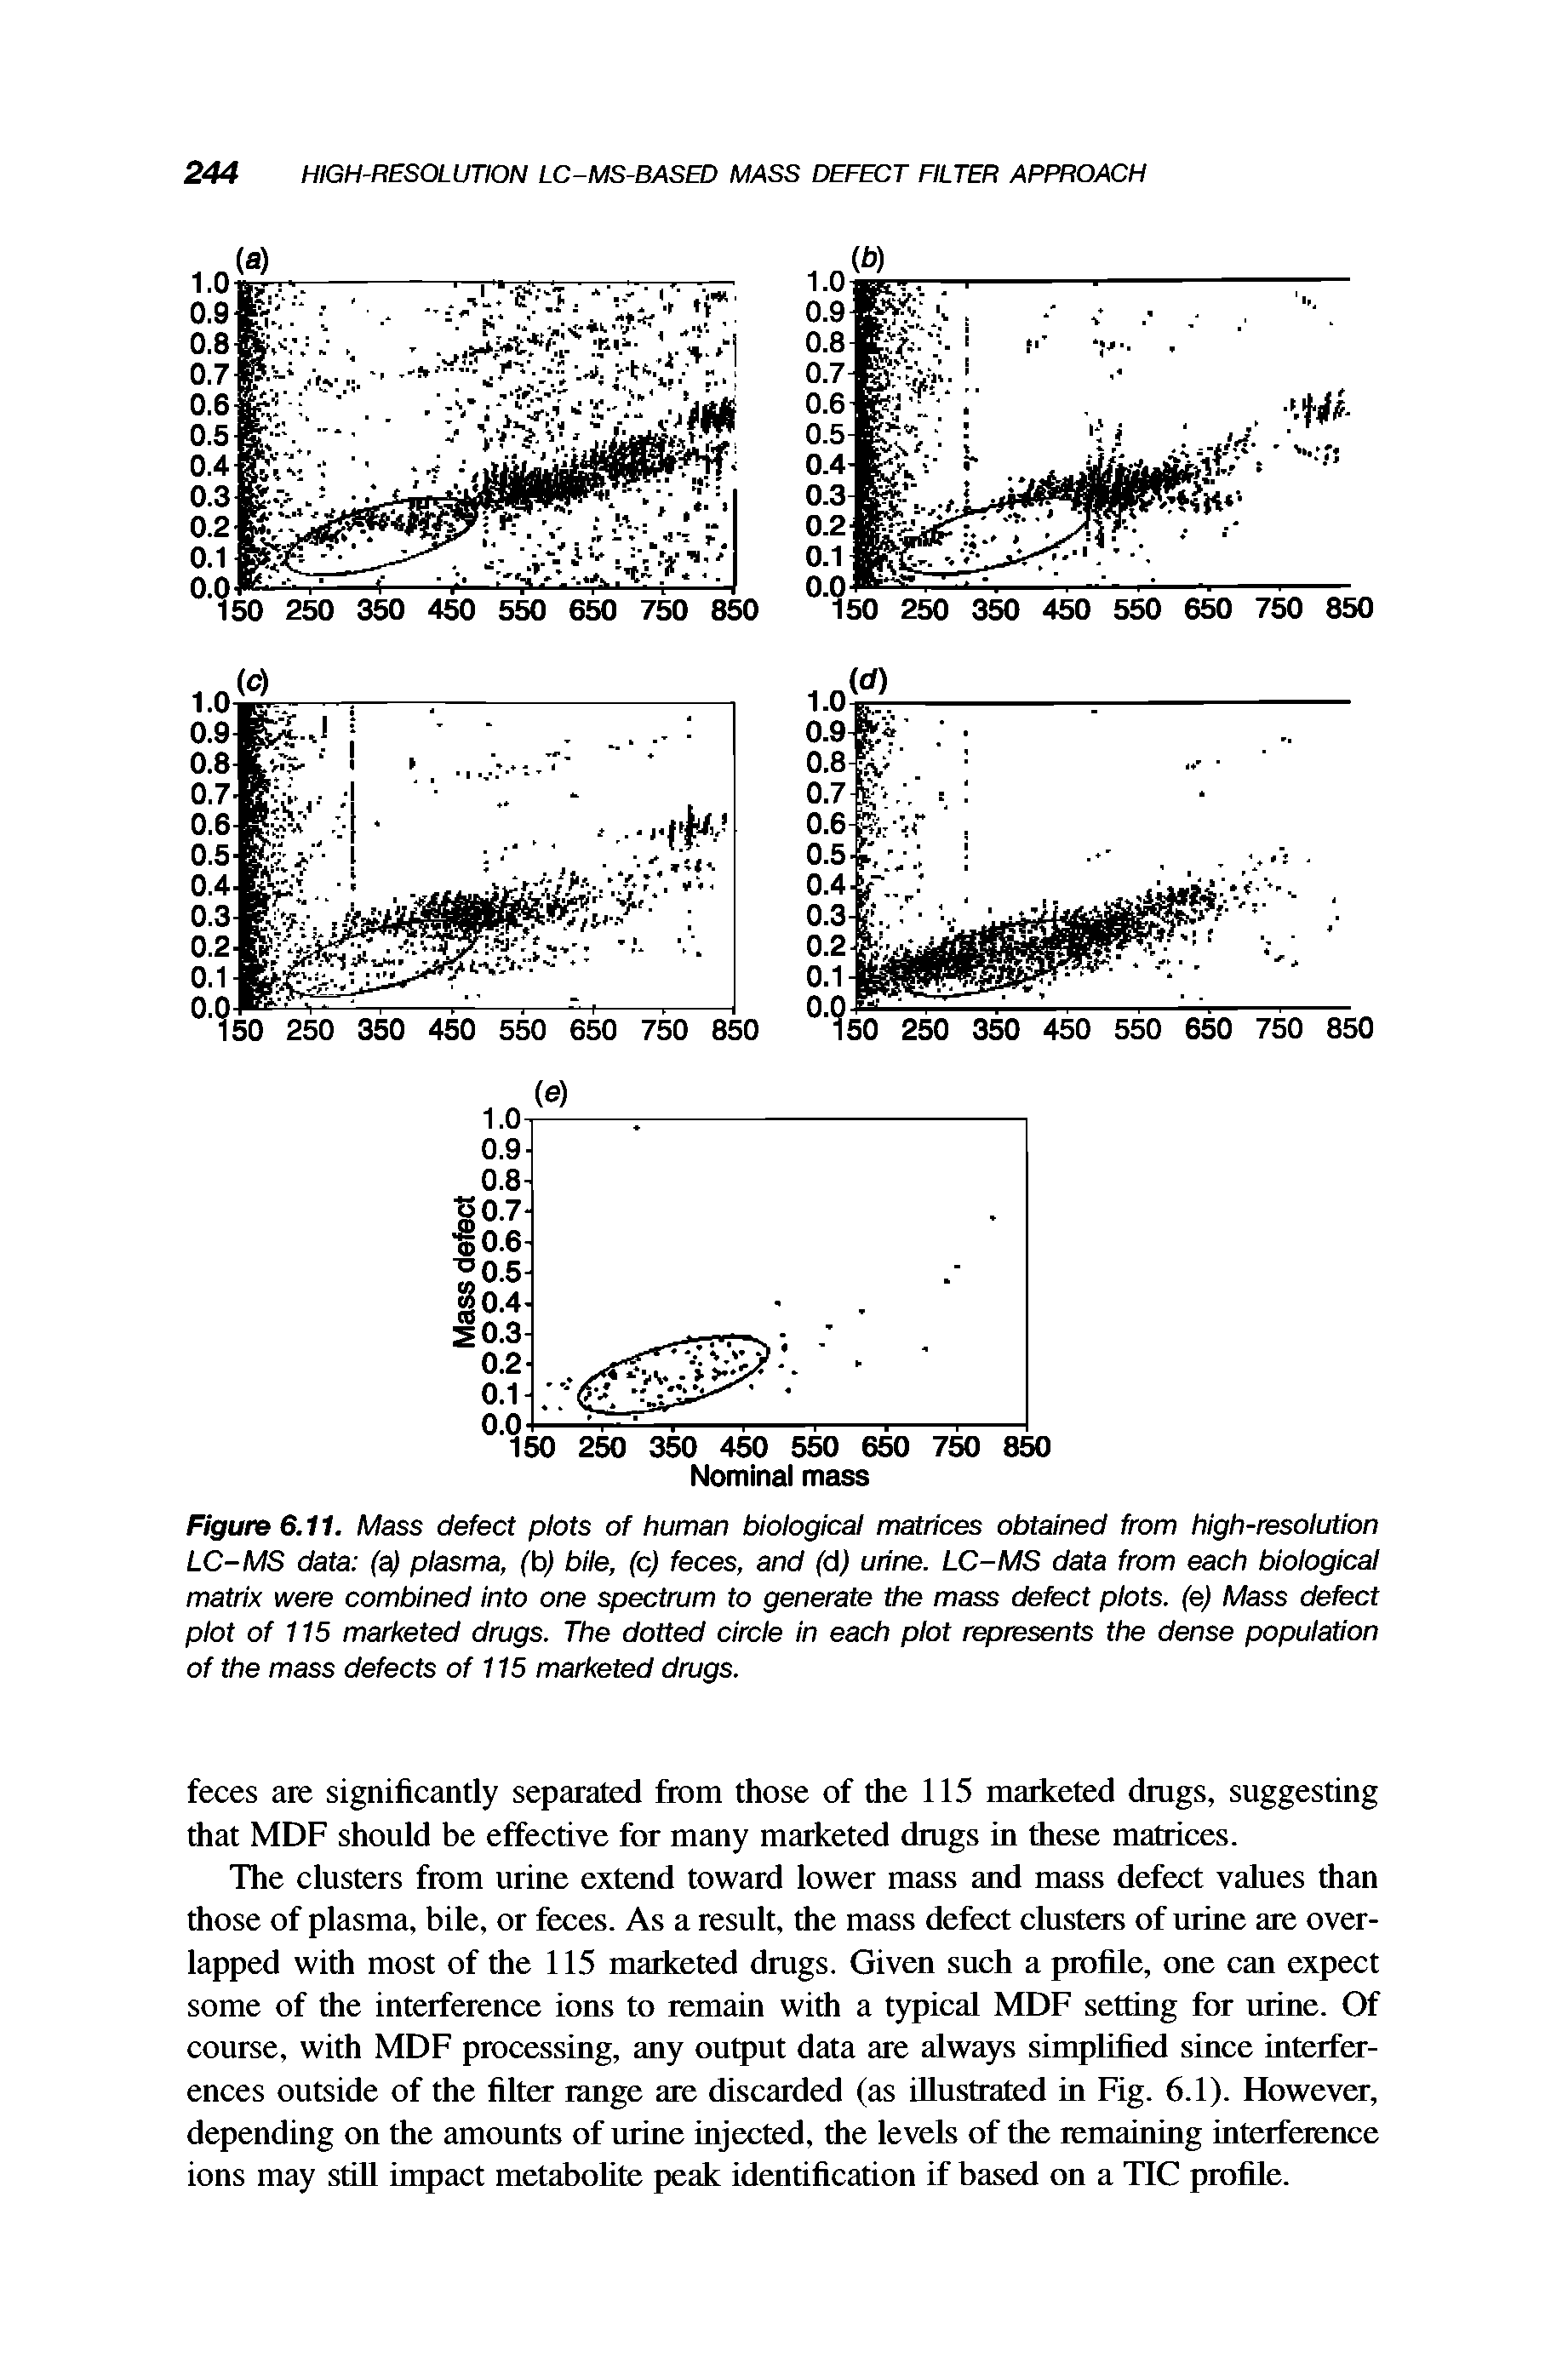 Figure 6.11. Mass defect plots of human biological matrices obtained from high-resolution LC-MS data (a) plasma, (b) bile, (c) feces, and (d) urine. LC-MS data from each biological matrix were combined into one spectrum to generate the mass defect plots, (e) Mass defect plot of 115 marketed drugs. The dotted circle in each plot represents the dense population of the mass defects of 115 marketed drugs.